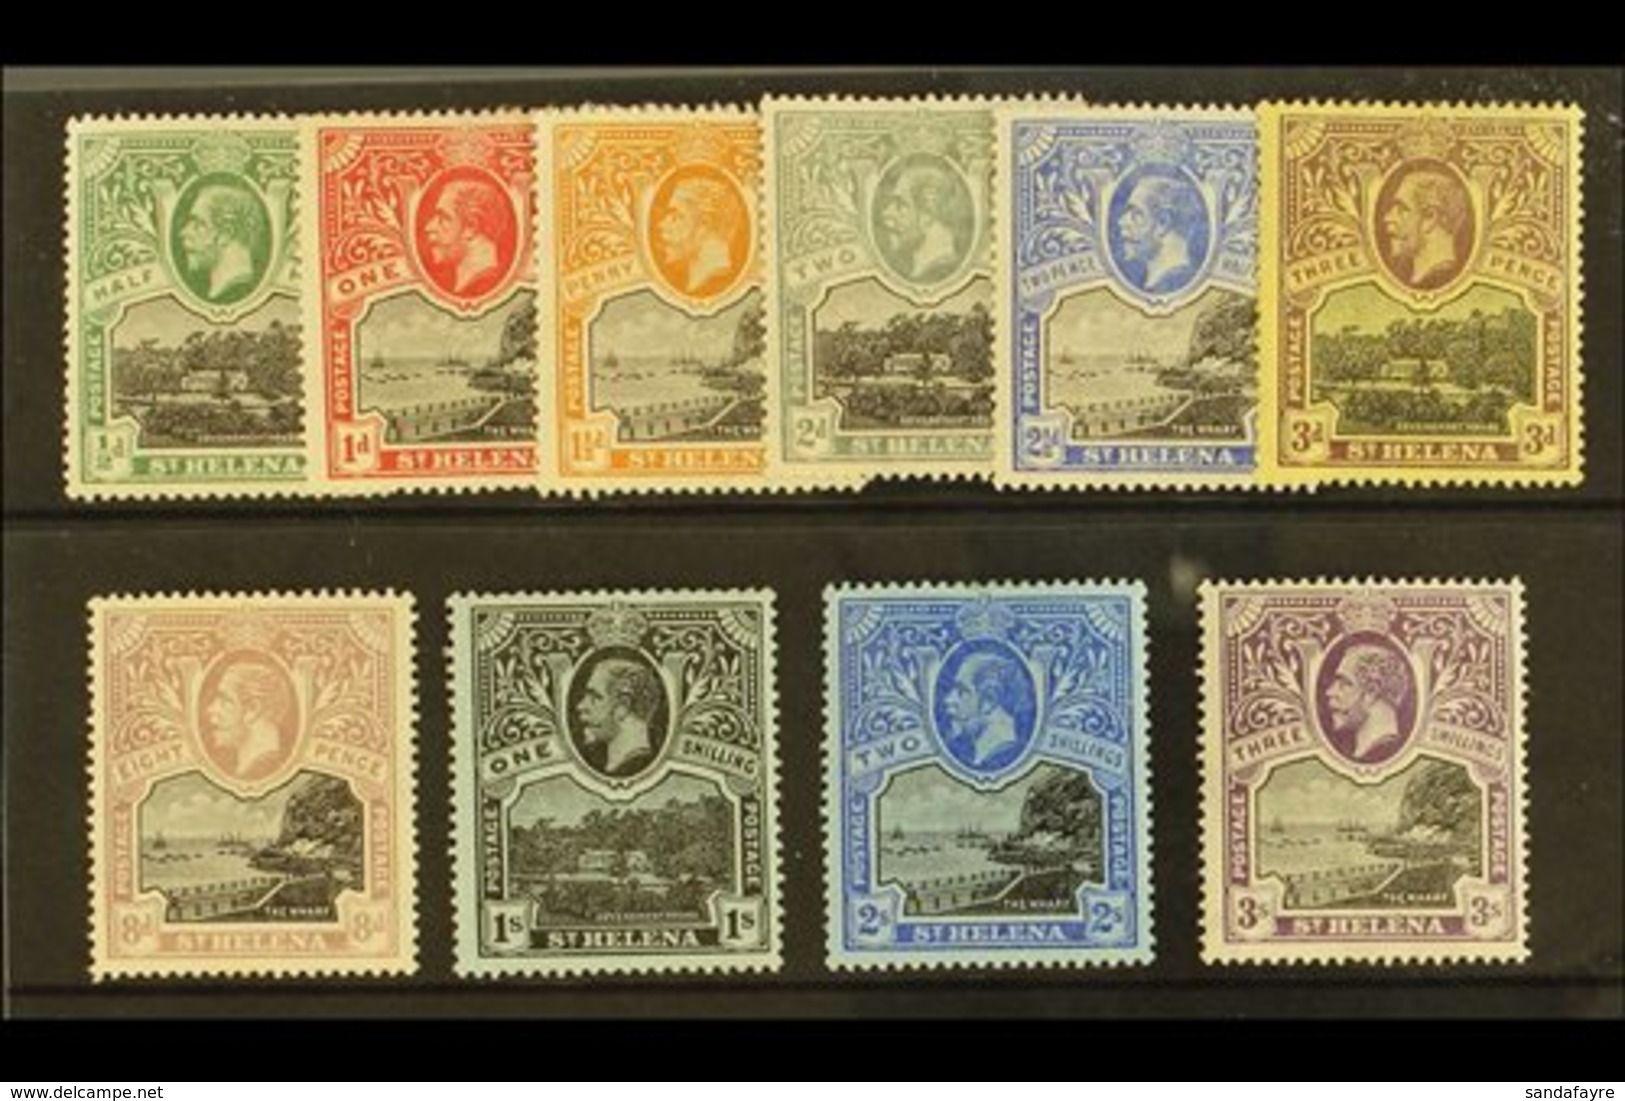 1912-16 "Government House And The Wharf" Complete KGV Set, SG 72/81, Fine Mint. (10 Stamps) For More Images, Please Visi - Saint Helena Island